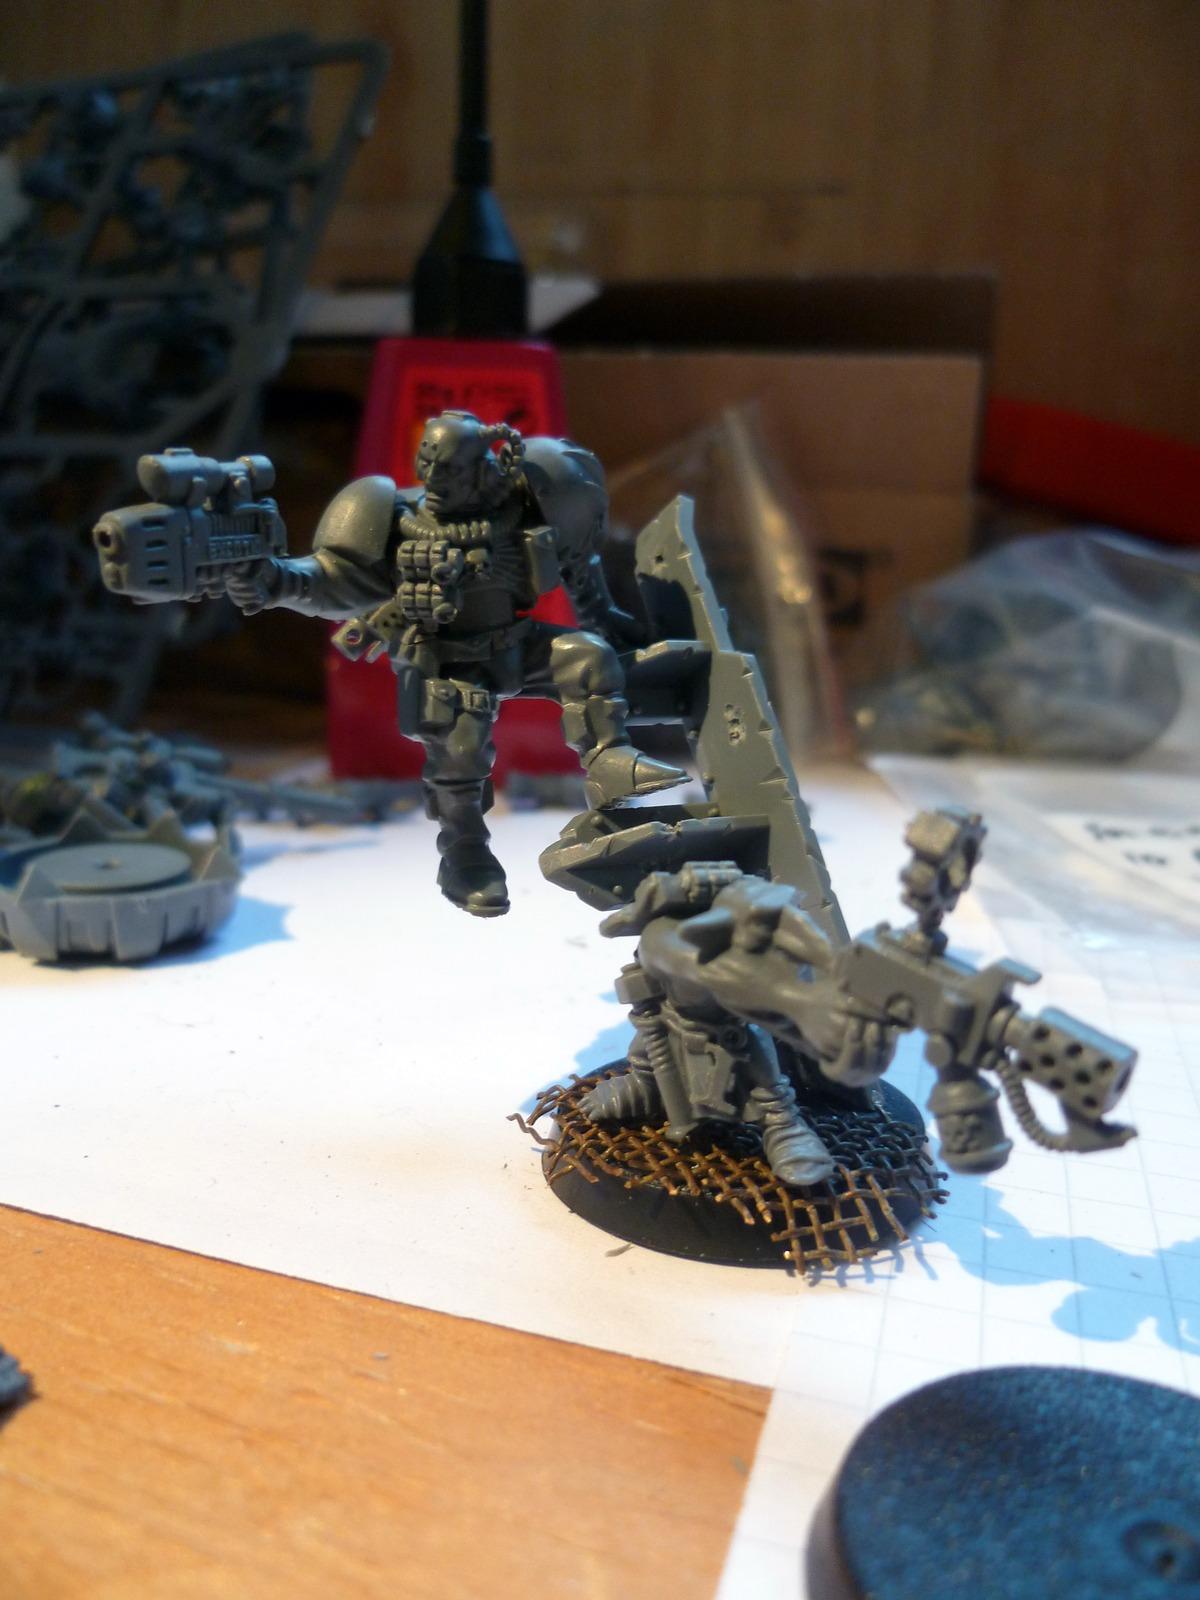 Scouts, Space Marines